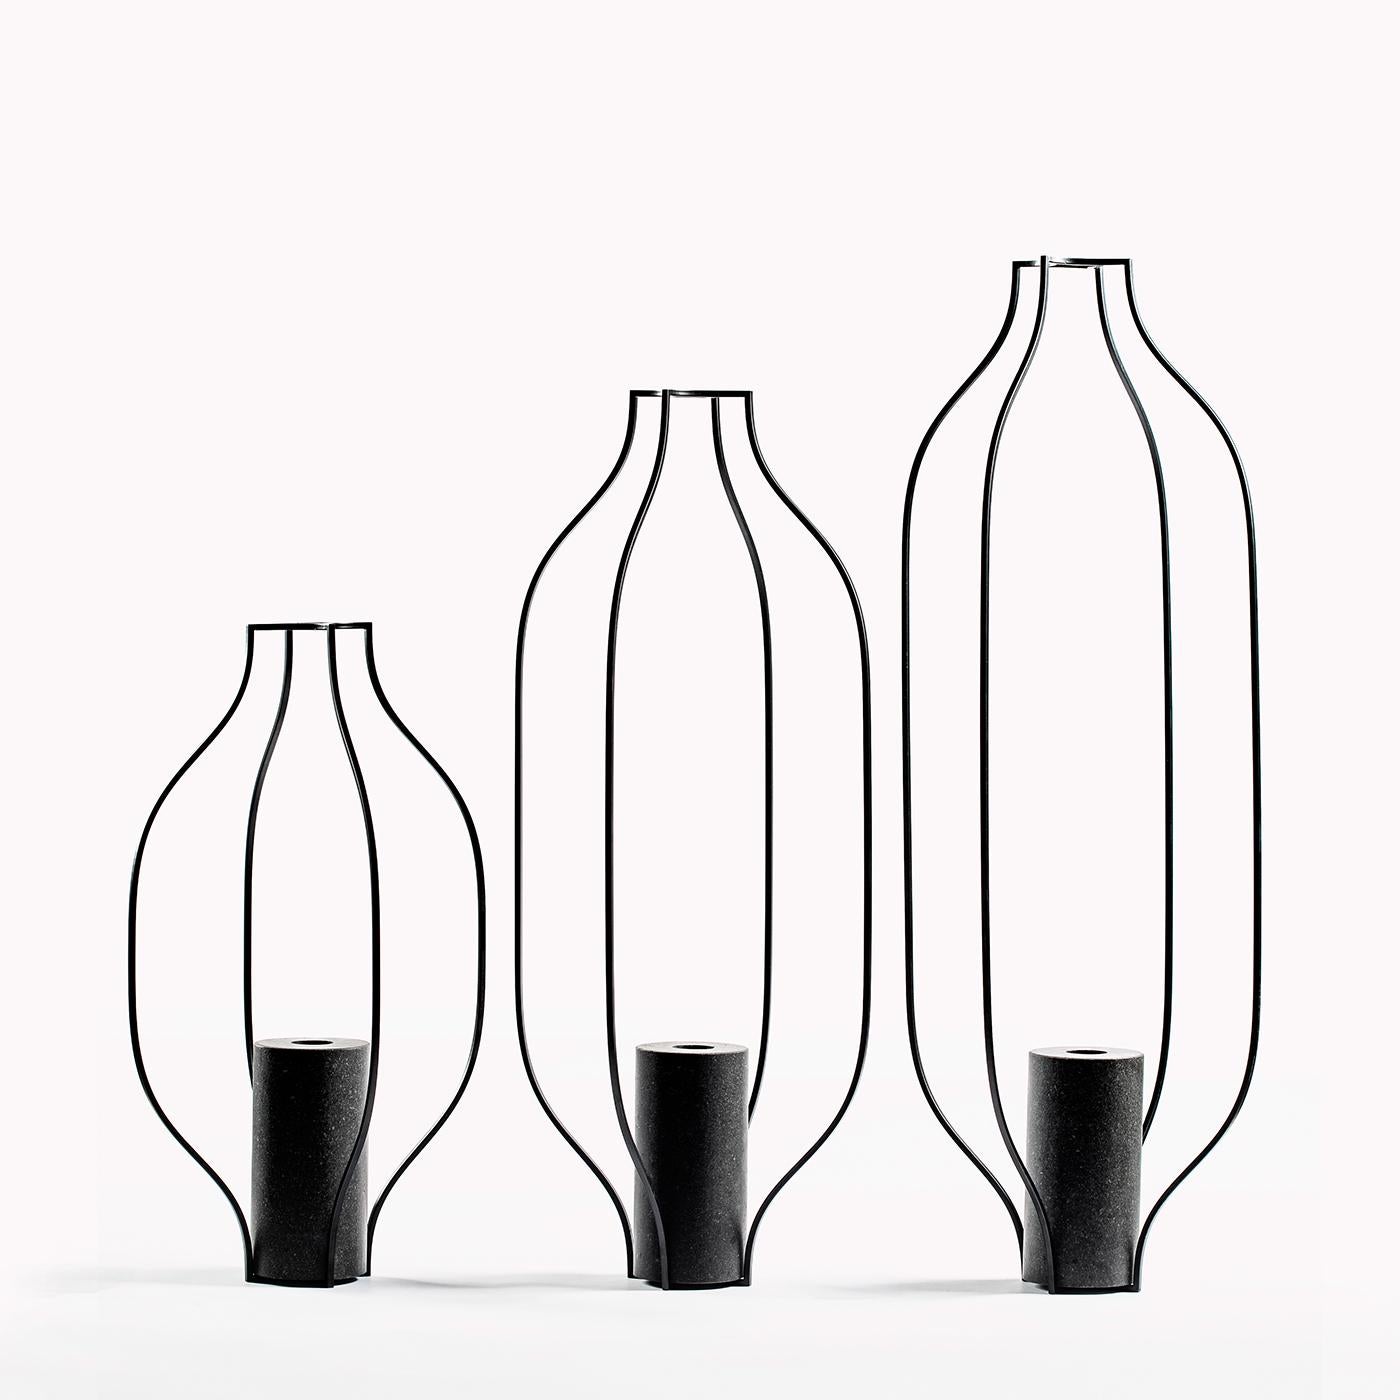 Iron and natural stone come together to reveal a lantern-like vase that is stunning in its verticality. Part of the Tarsie Geometriche Collection, this piece features opaque black iron rods surrounding a cylindrical vase crafted of black lava stone